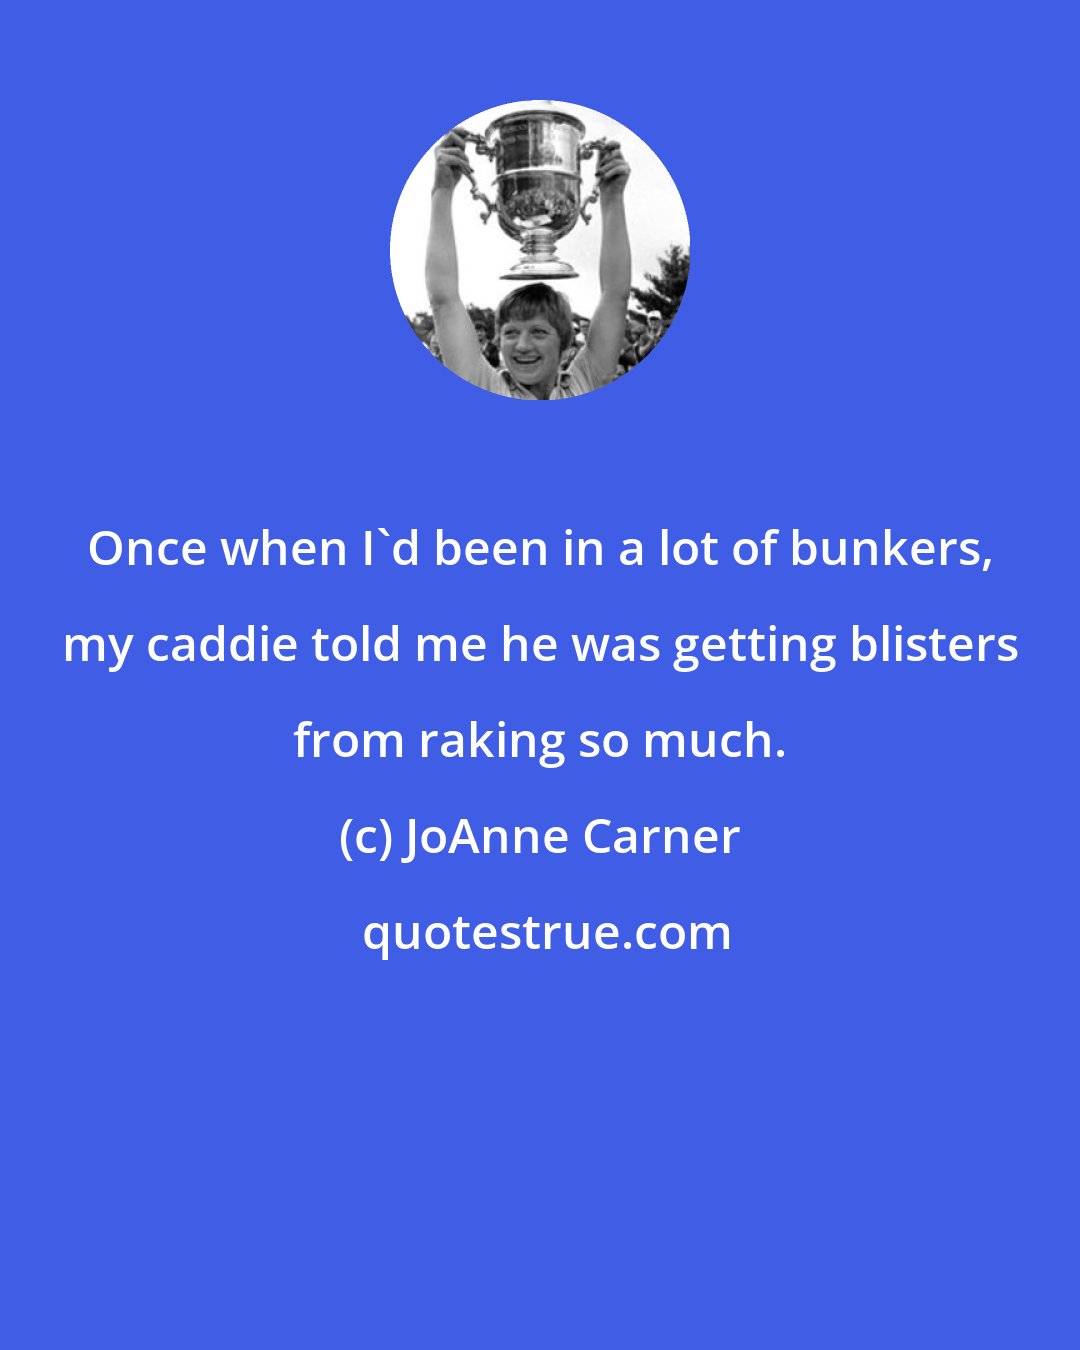 JoAnne Carner: Once when I'd been in a lot of bunkers, my caddie told me he was getting blisters from raking so much.